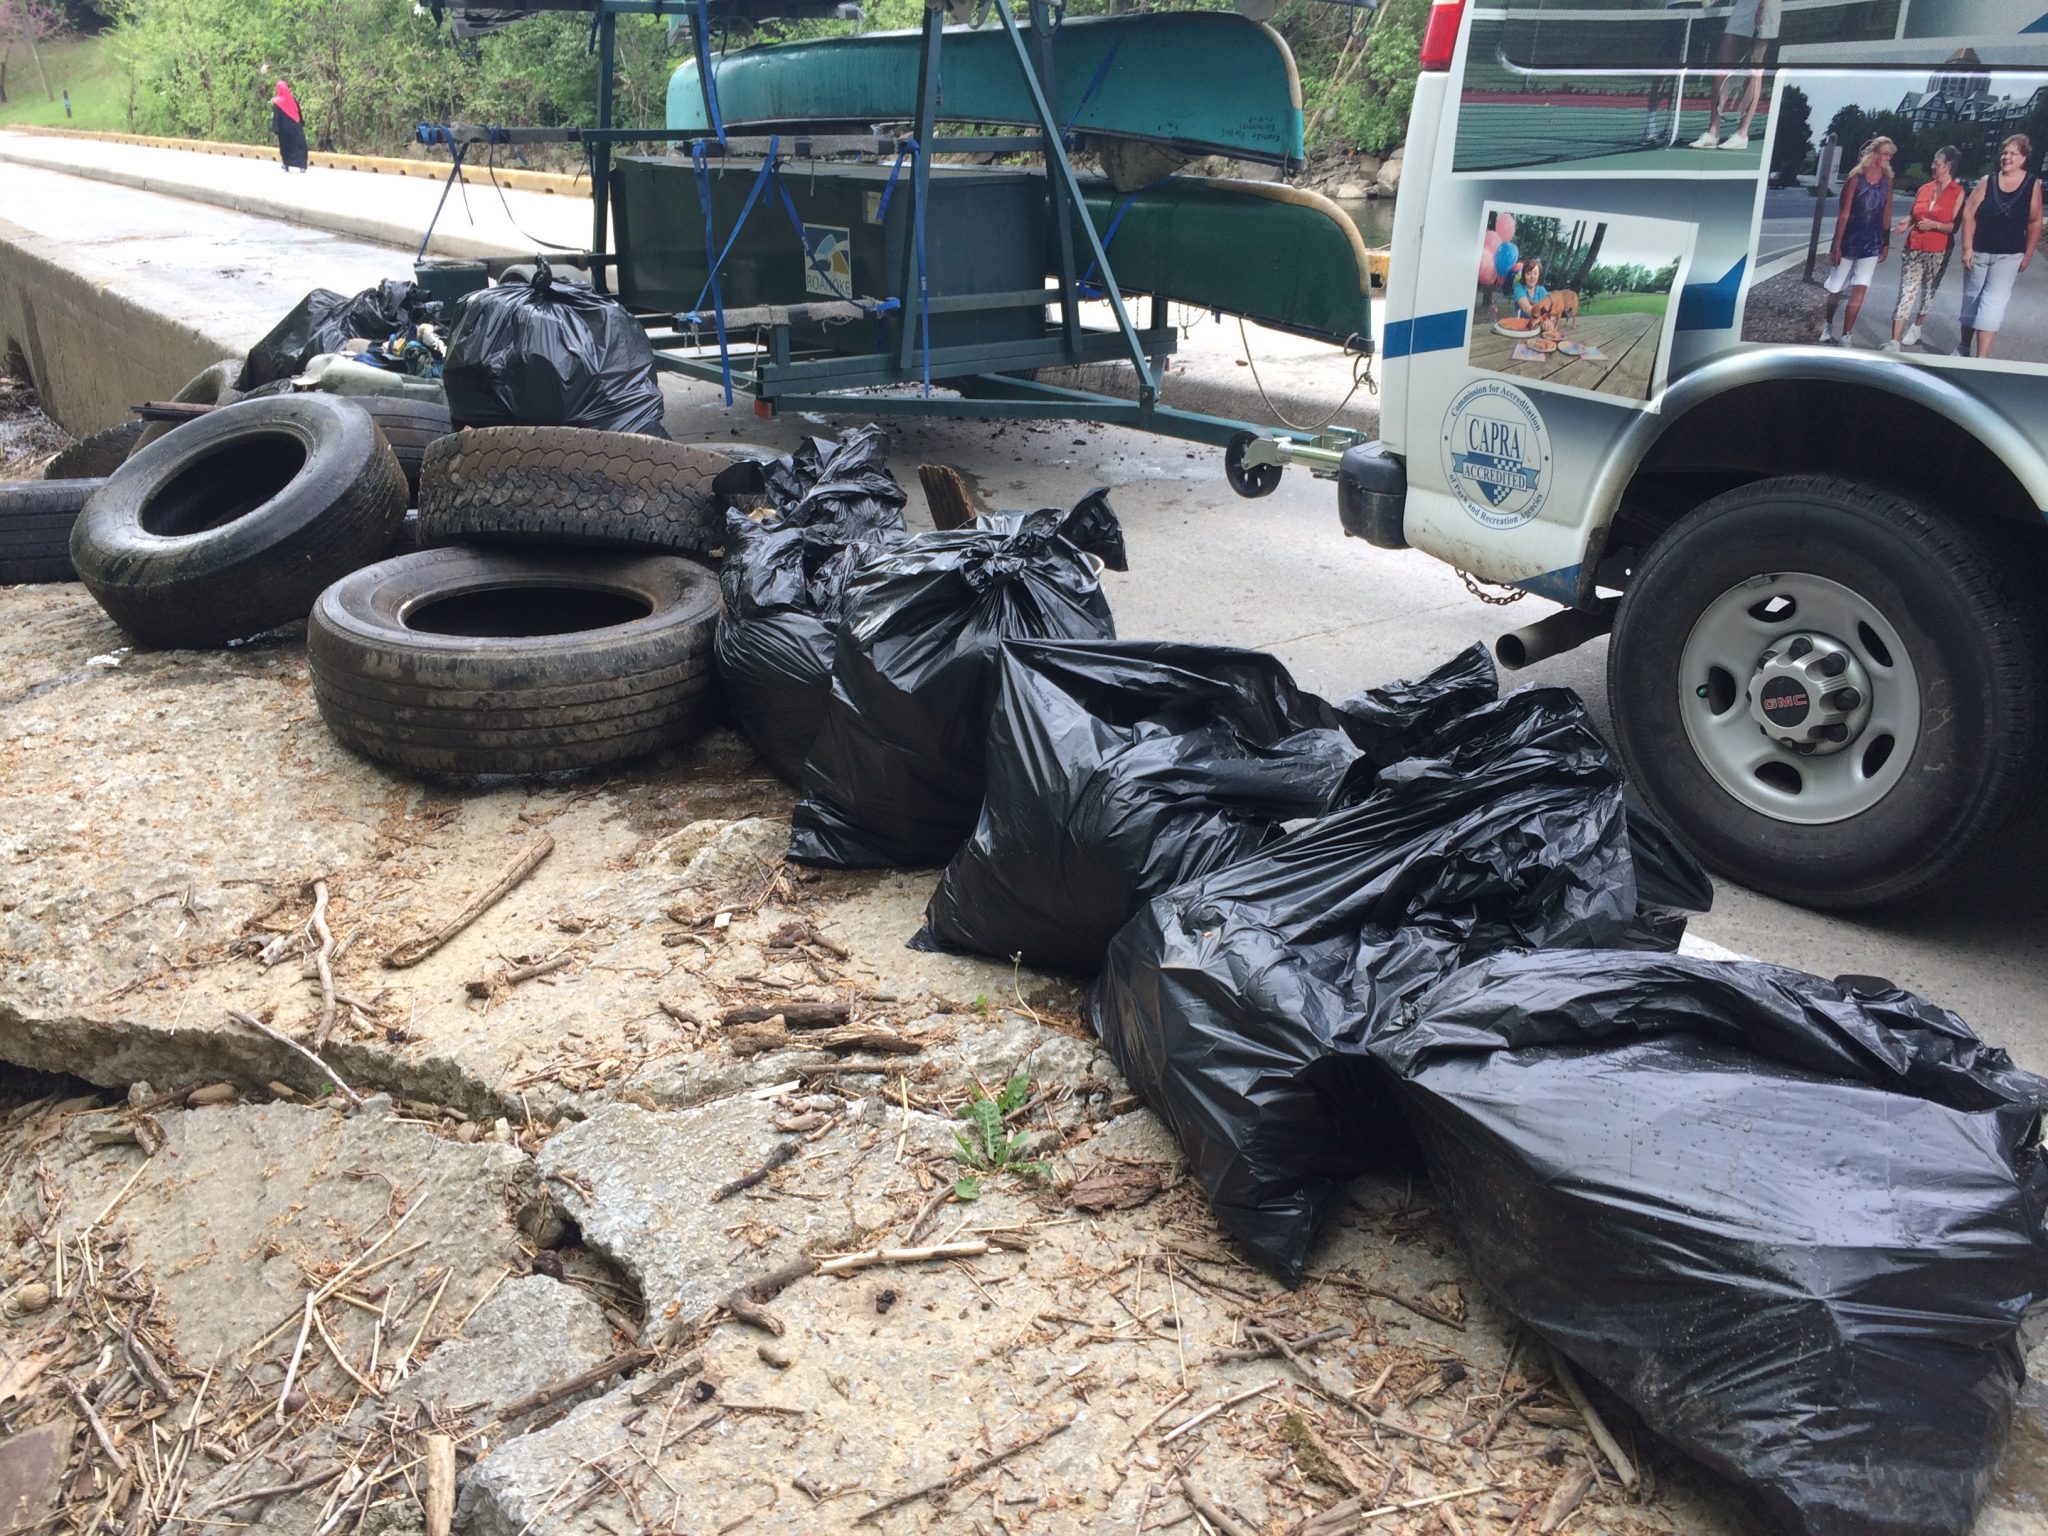 Some of the trash and tires we collected